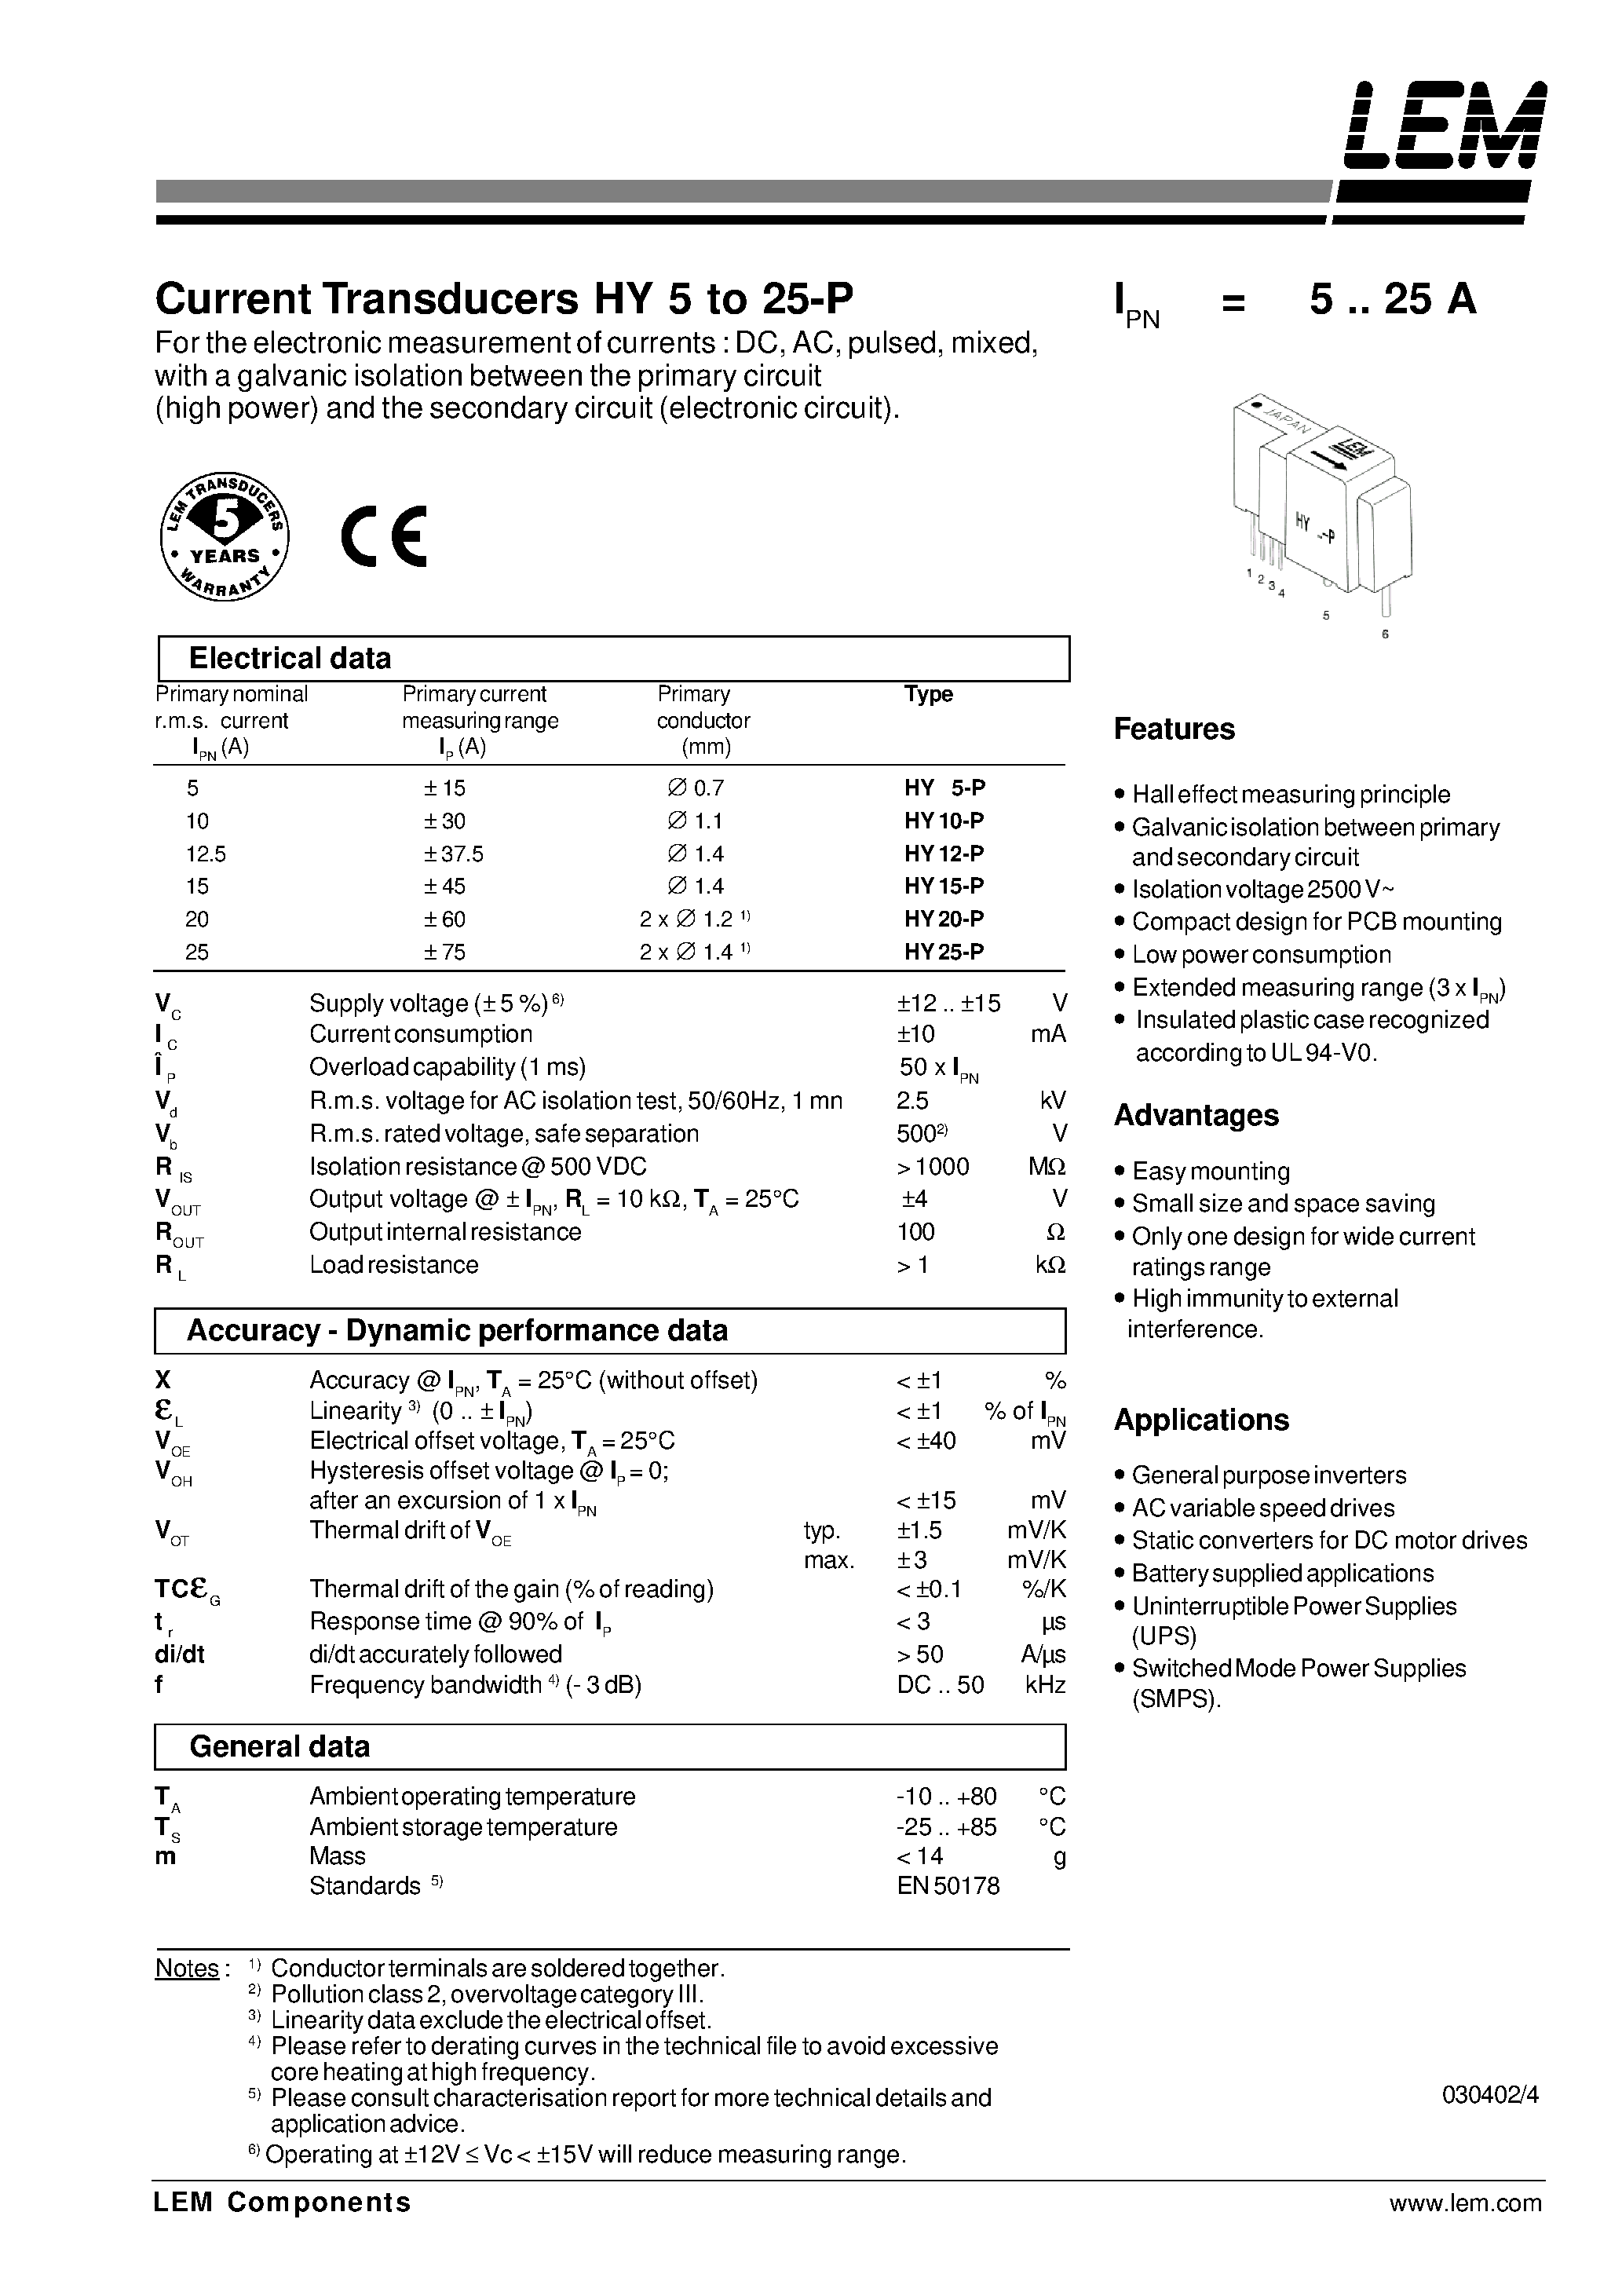 Datasheet HY5-P - Current Transducers HY 5 to 25-P page 1